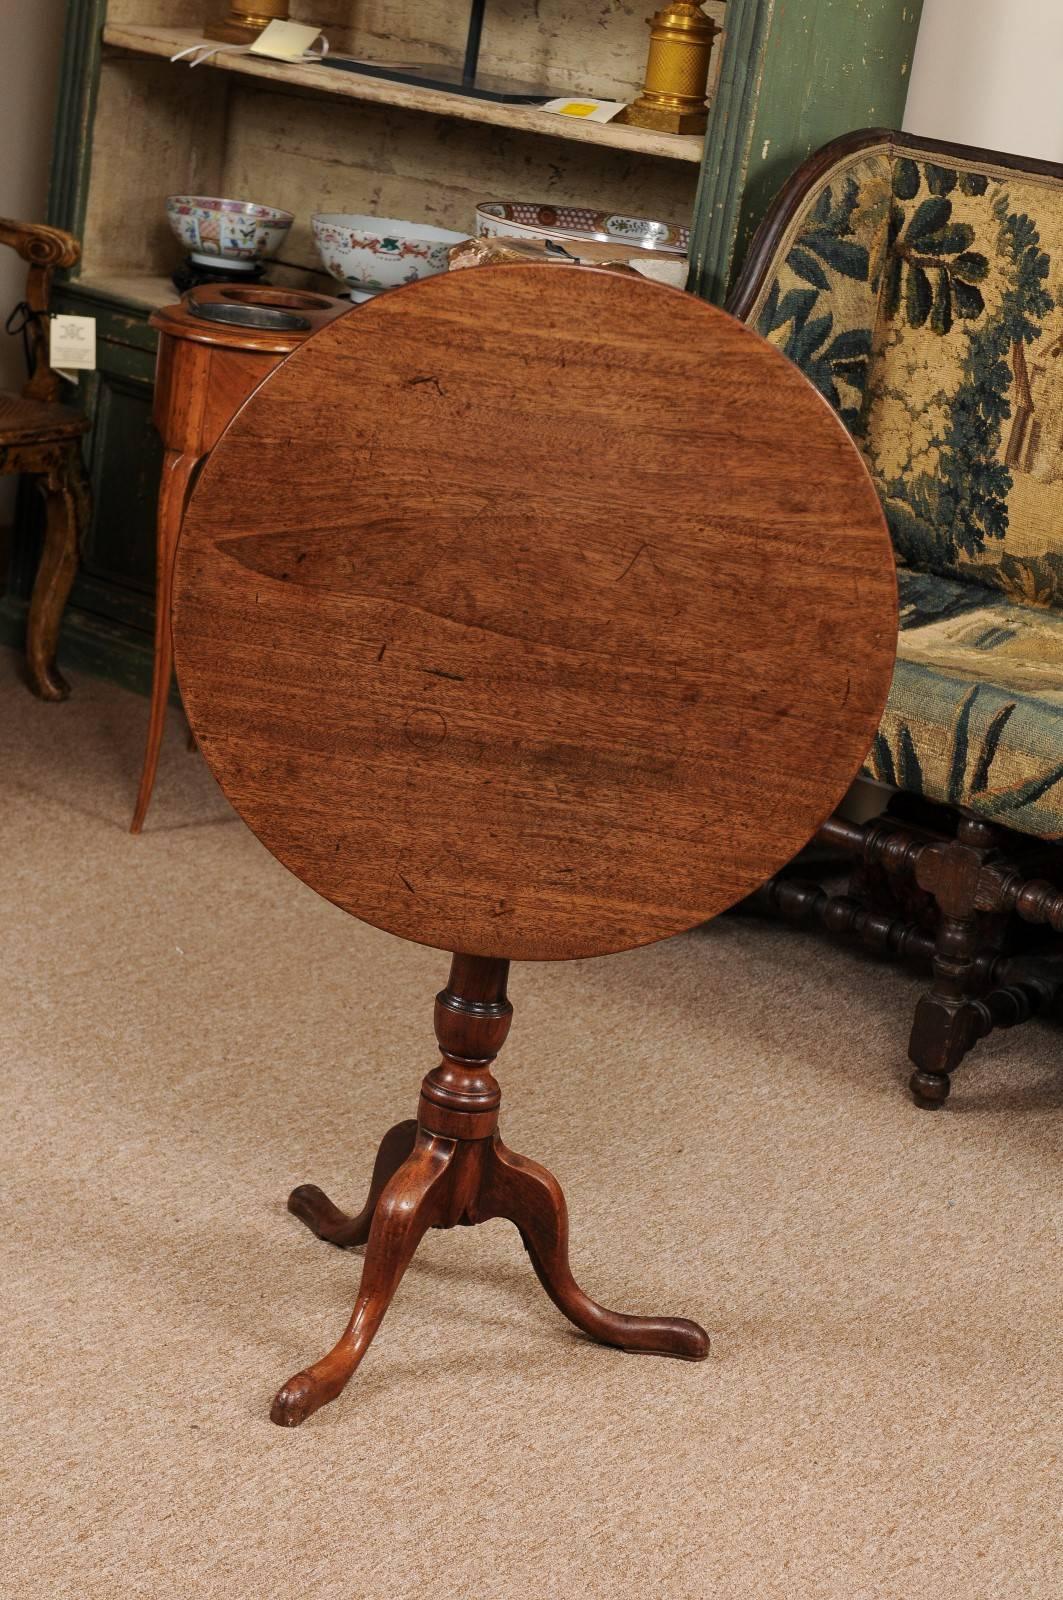 Tilt-top table in mahogany with tripod base terminating in pad feet, 18th century England.